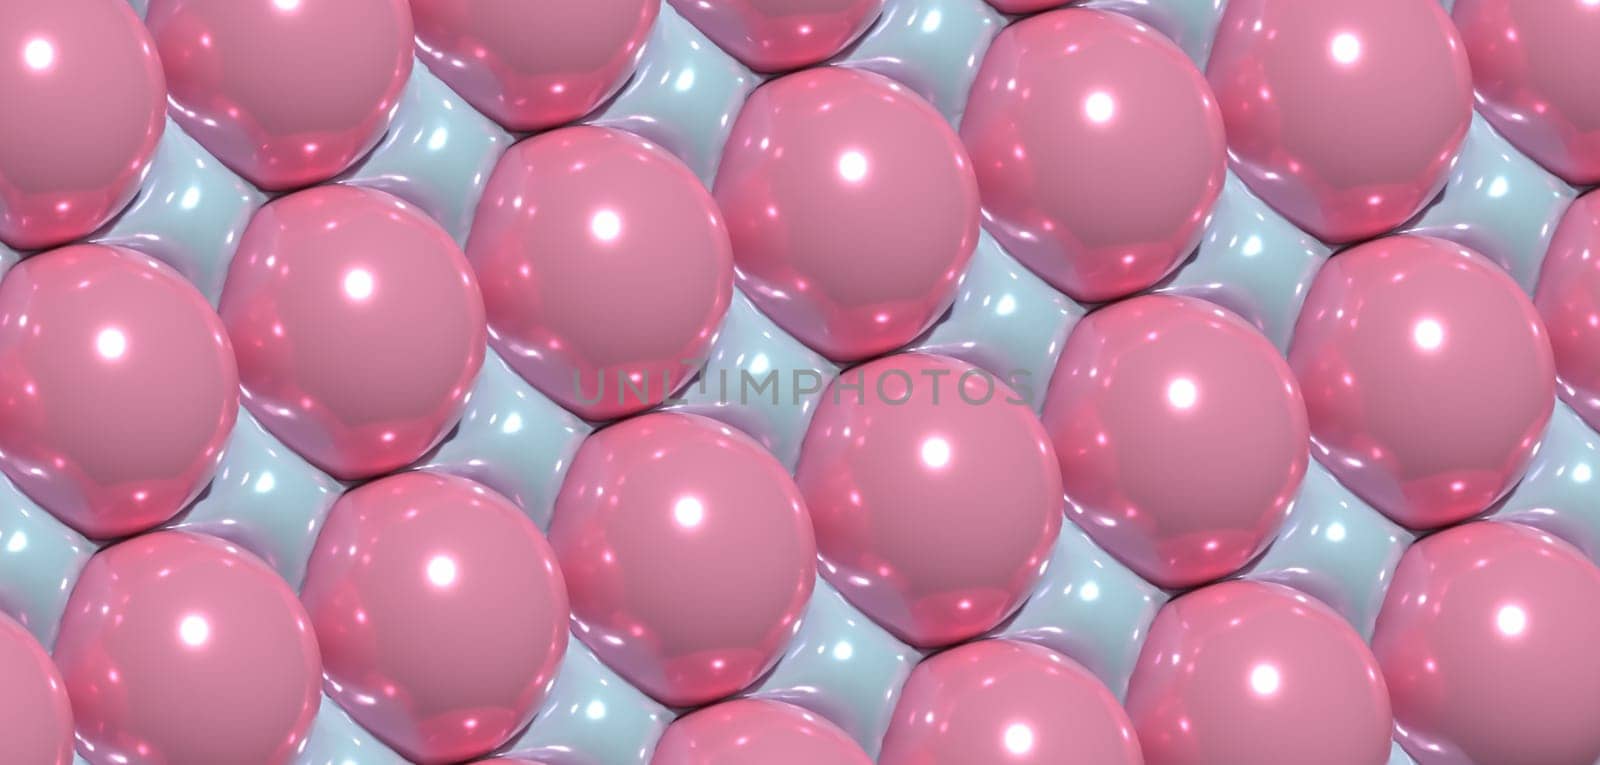 Background with pink circles, inflated shapes. 3d rendering illustration by ndanko